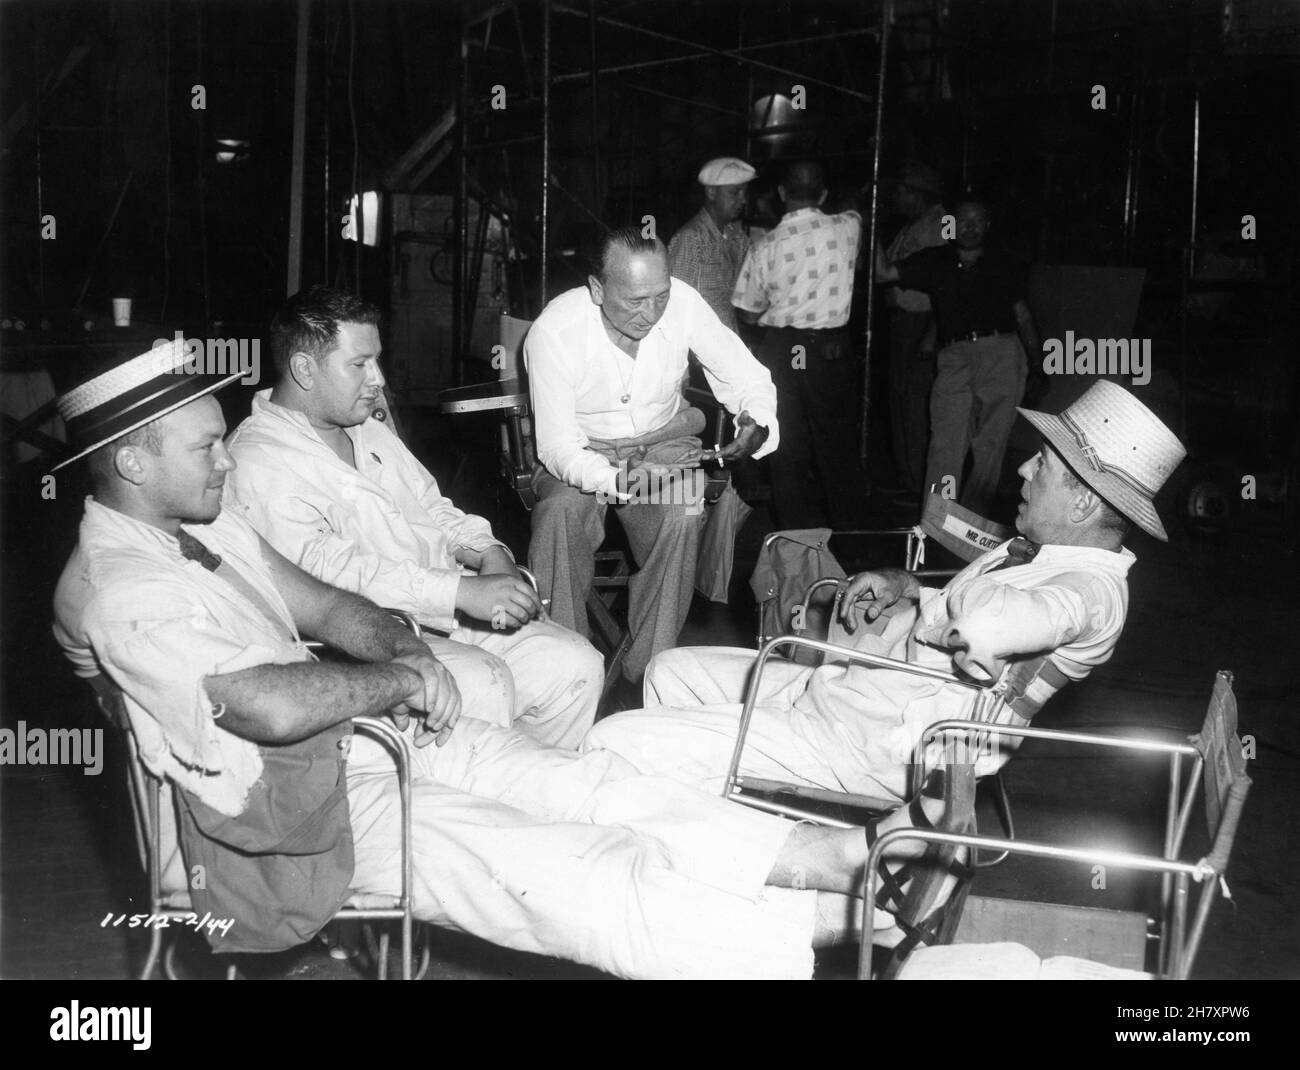 ALDO RAY PETER USTINOV Director MICHAEL CURTIZ and HUMPHREY BOGART on set candid during filming of WE'RE NO ANGELS 1955 director MICHAEL CURTIZ play Albert Husson costume design Mary Grant Paramount Pictures Stock Photo